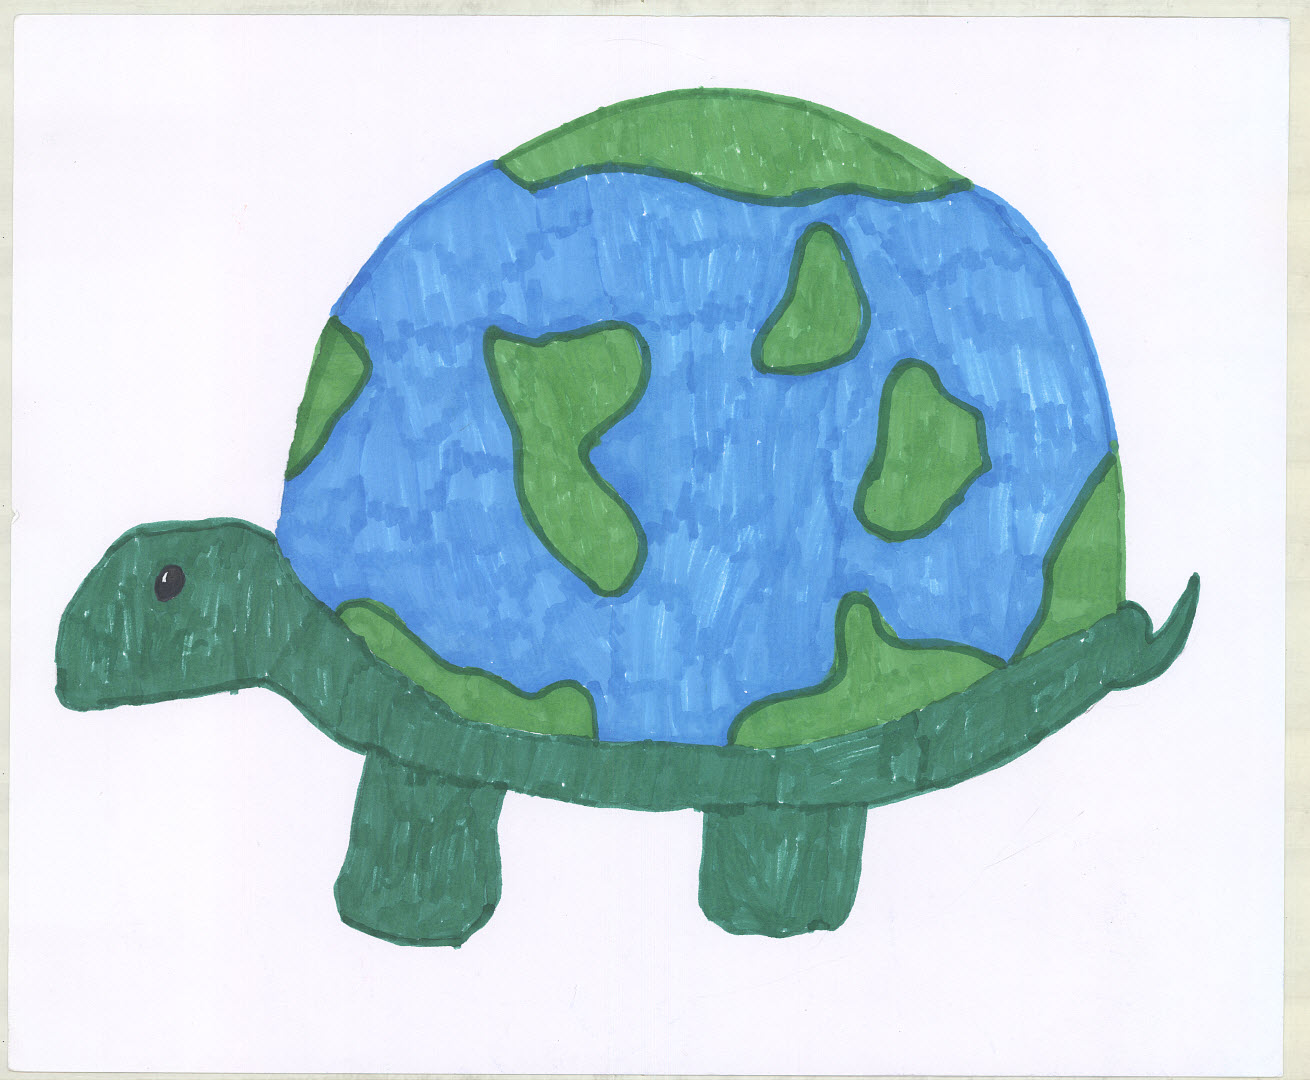 Shows a turtle with the earth as its shell